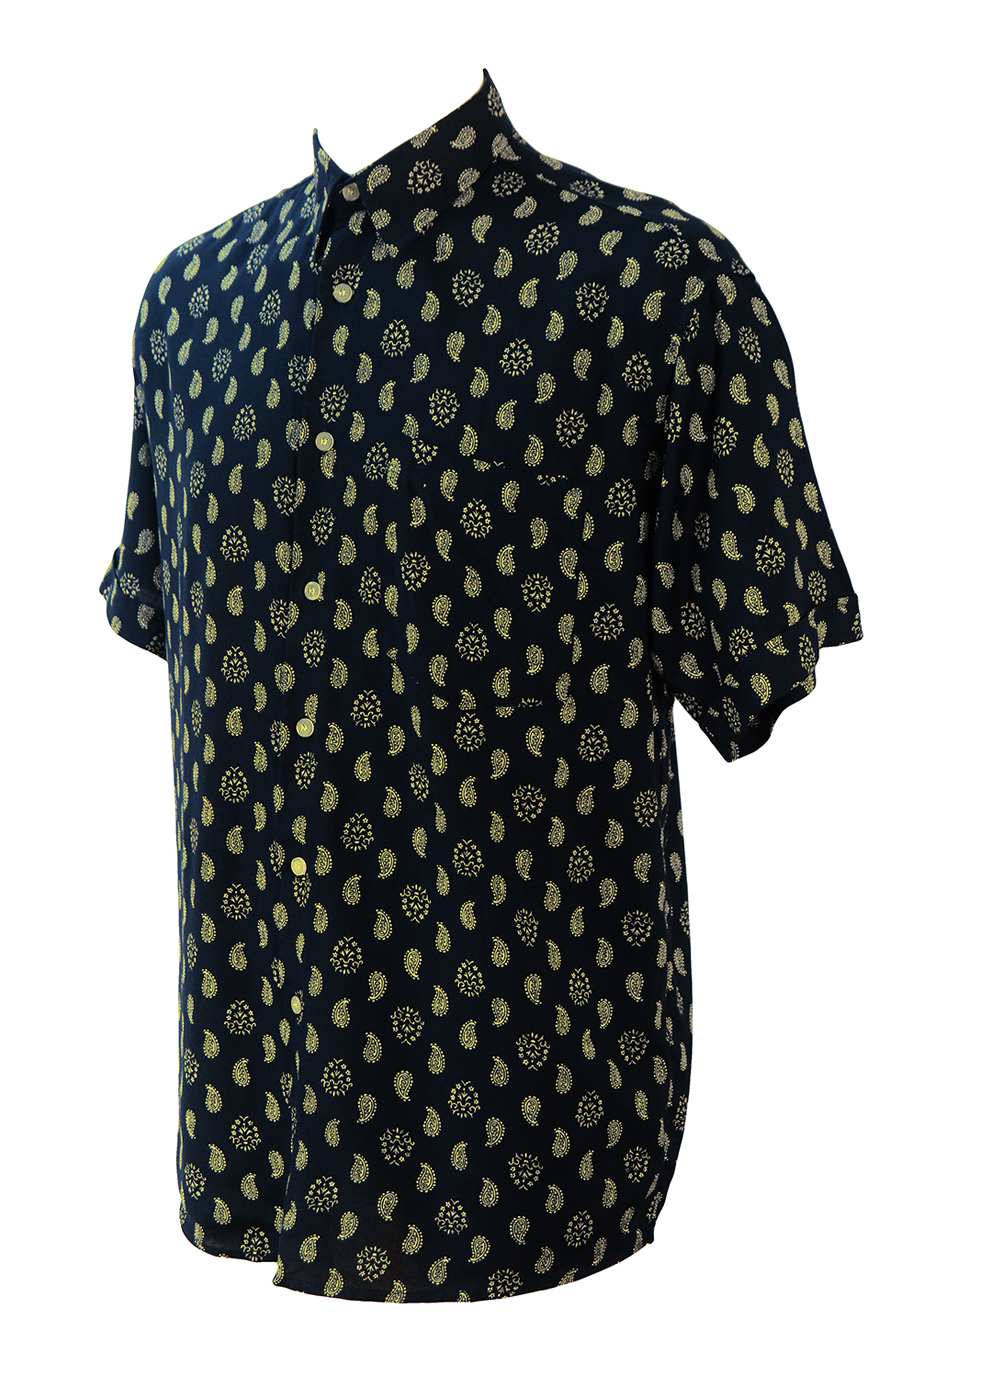 Vintage 90's Black Short Sleeved Shirt with Cream Paisley Pattern - 90 ...